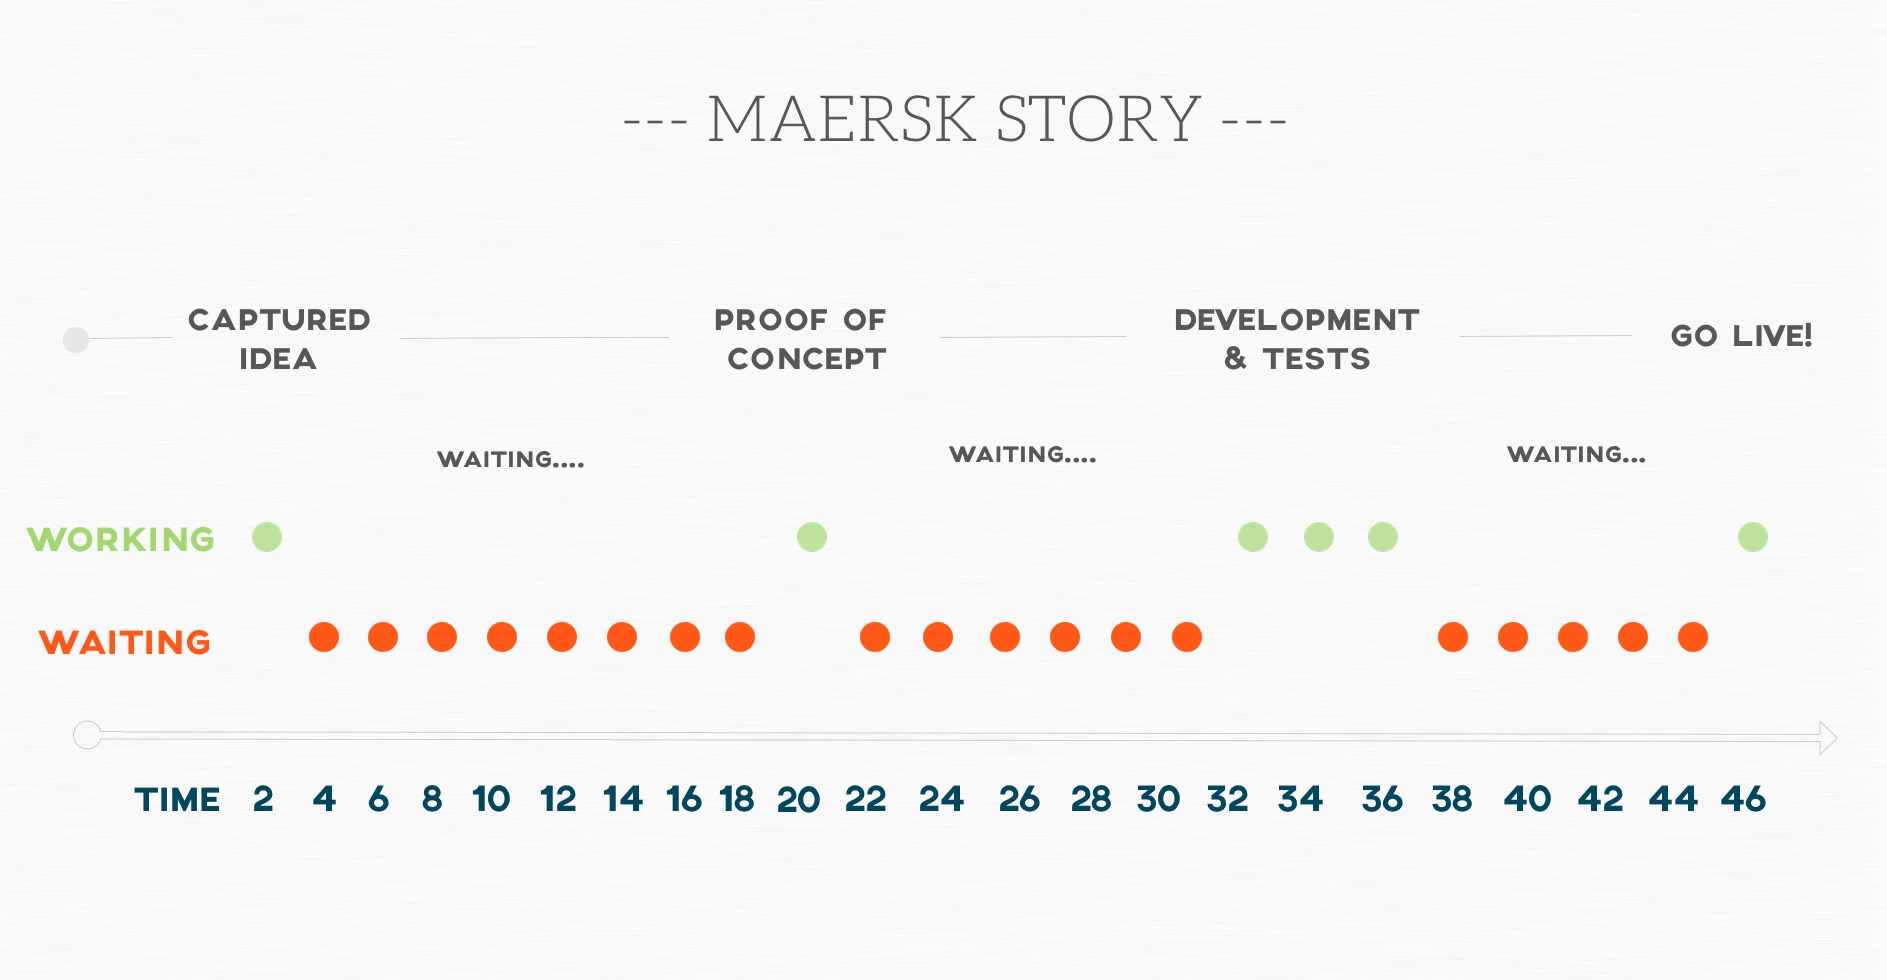 Value Stream Mapping - Maersk